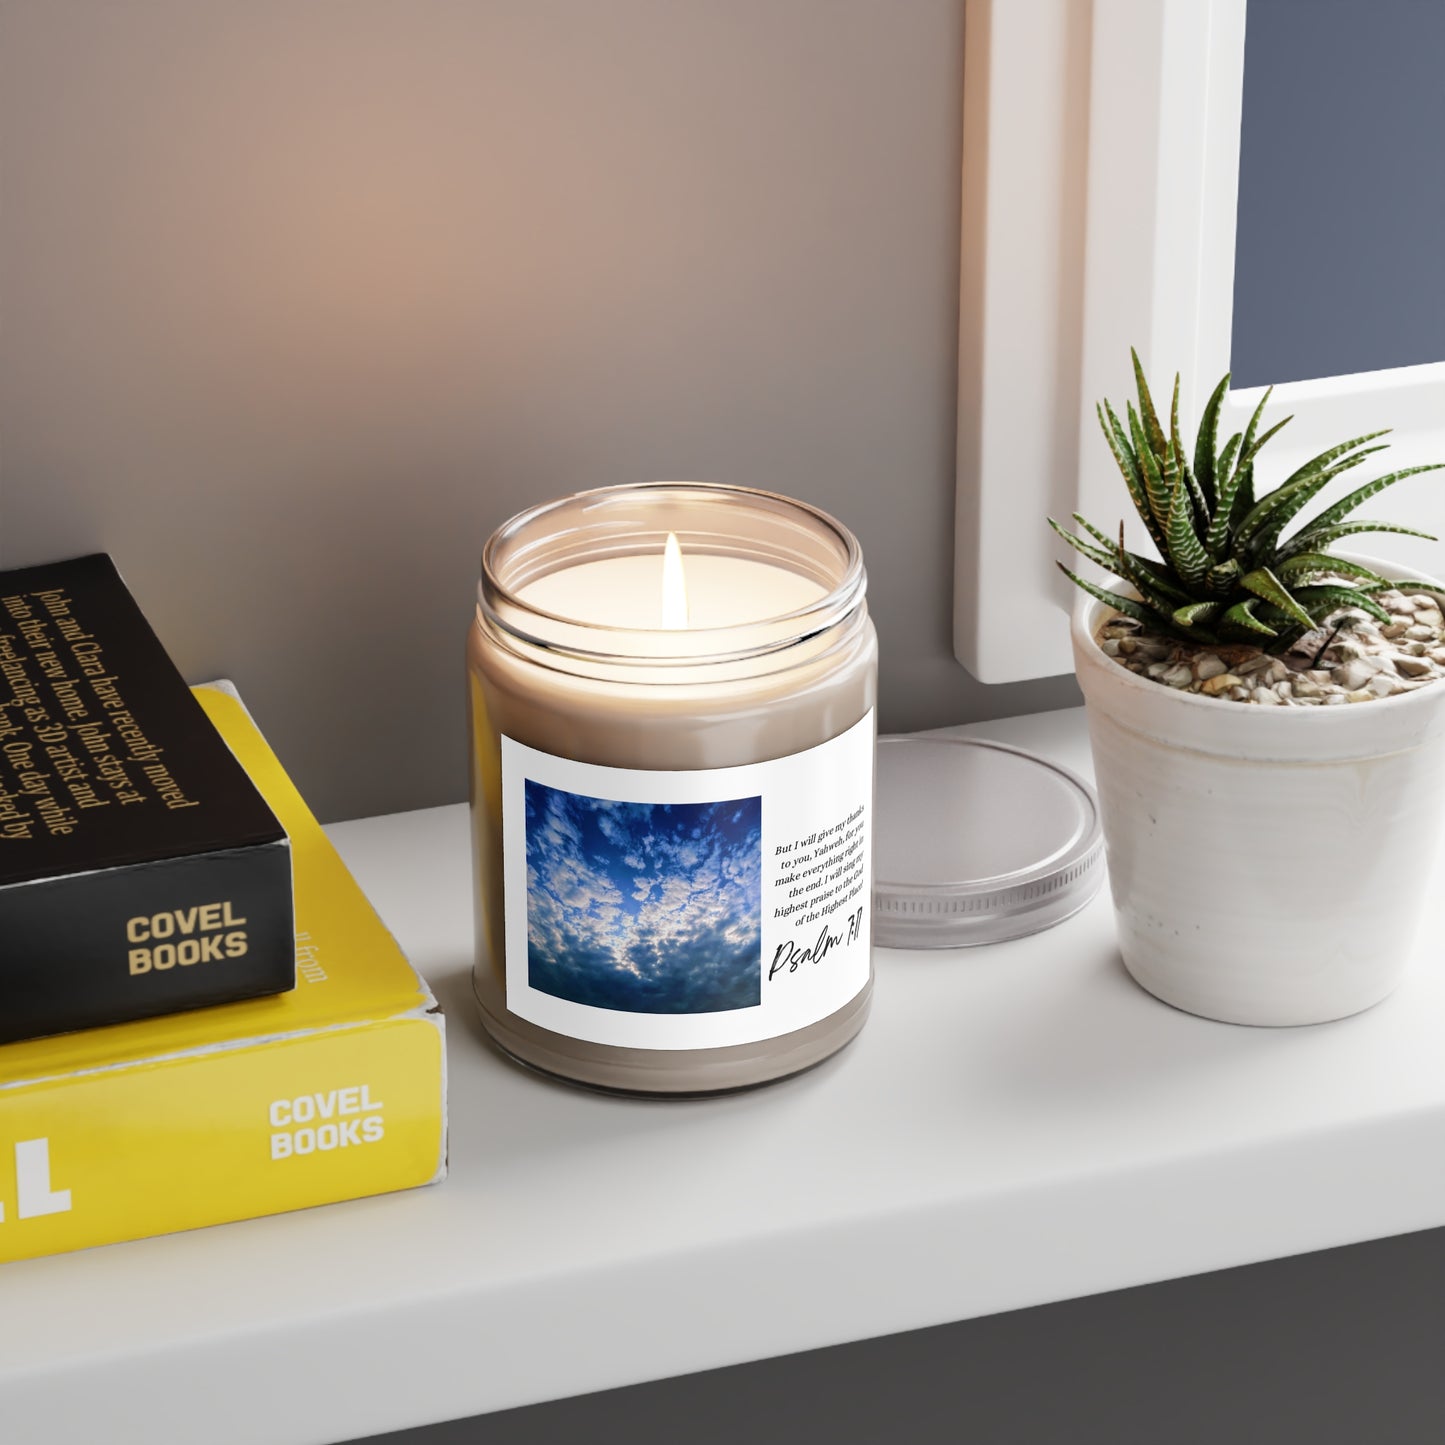 "YOU MAKE EVERYTHING RIGHT IN THE END", Psalm 7:17, Bespoke Scented Candles,